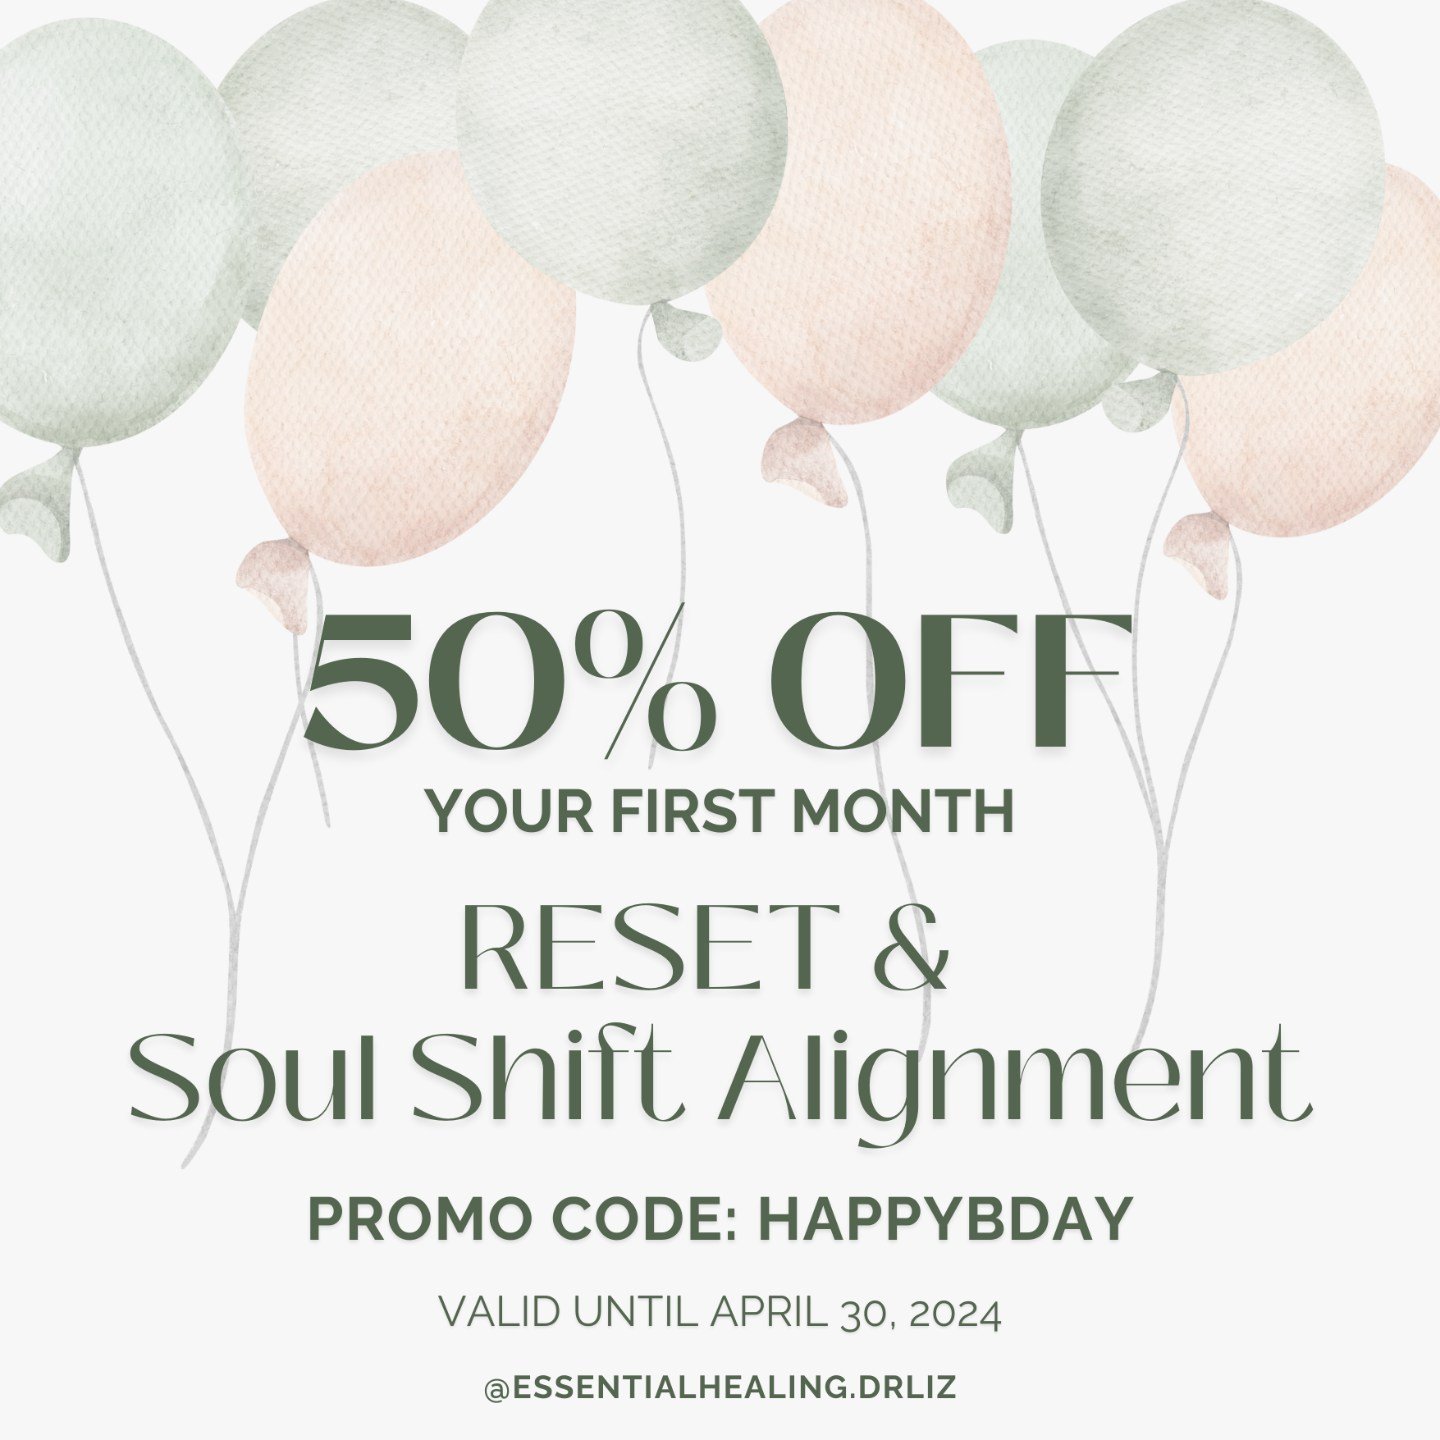 🎂 🥳 It's Dr. Liz's birthday month, but YOU get a gift. Use code &quot;HAPPYBDAY&quot; for 50% off of your first month of RESET or Soul Shift Alignment! 🎁
.
Link in bio to join. Offer expires 4/30/24. Valid for new members only.
.
.
.
#confidence #